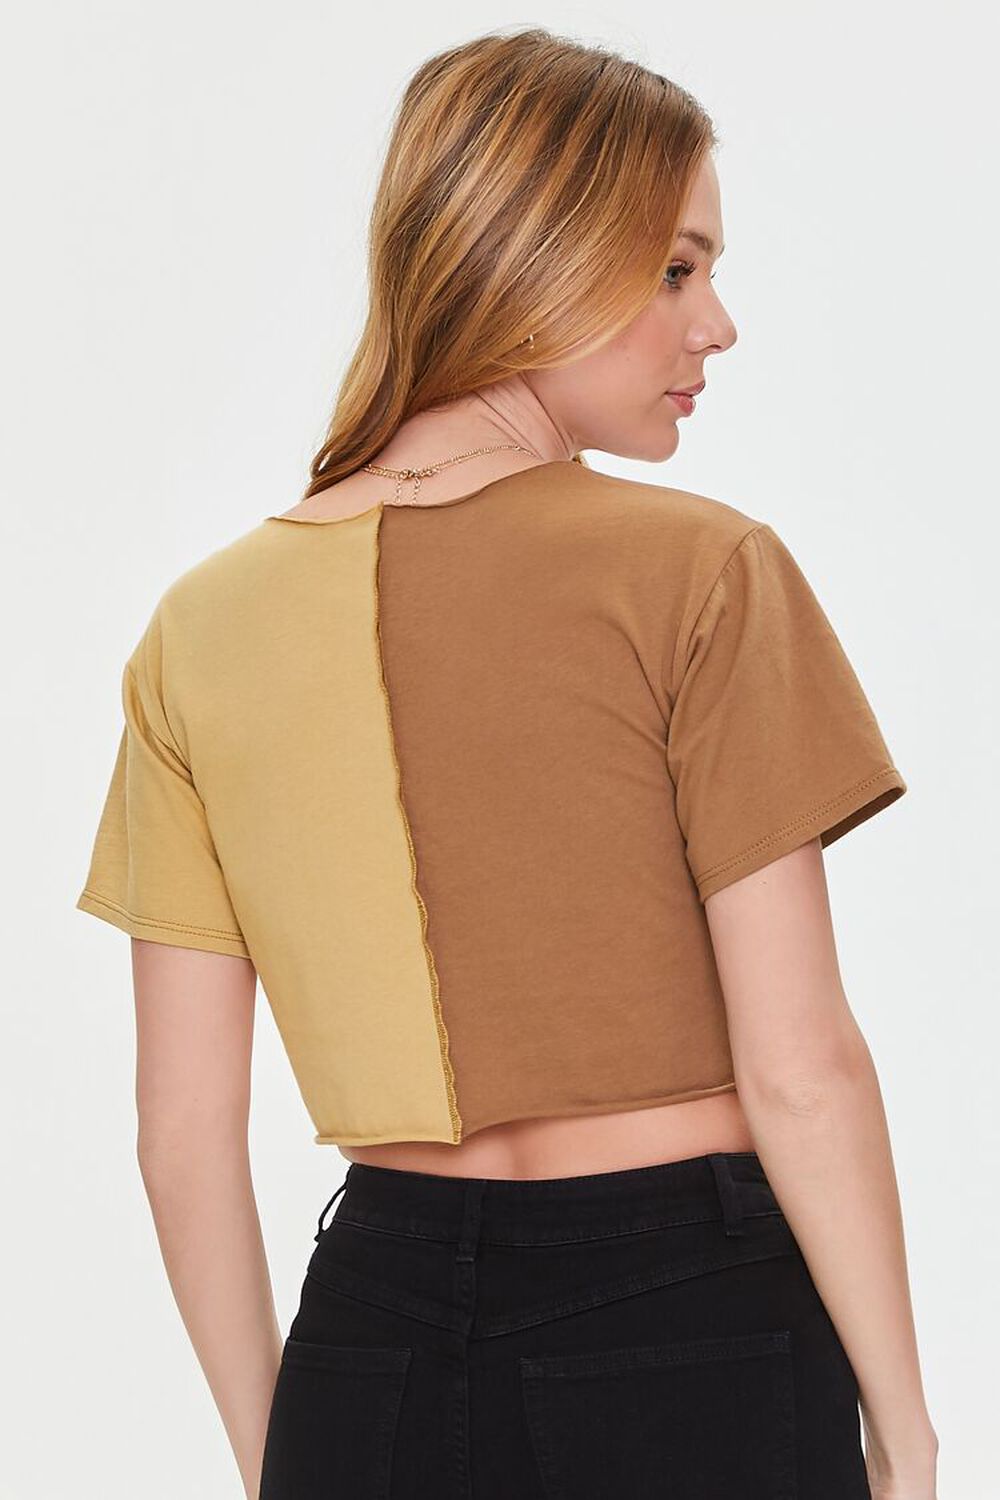 Graphic Monogram Accent Crop Top - OBSOLETES DO NOT TOUCH 1AAWKQ